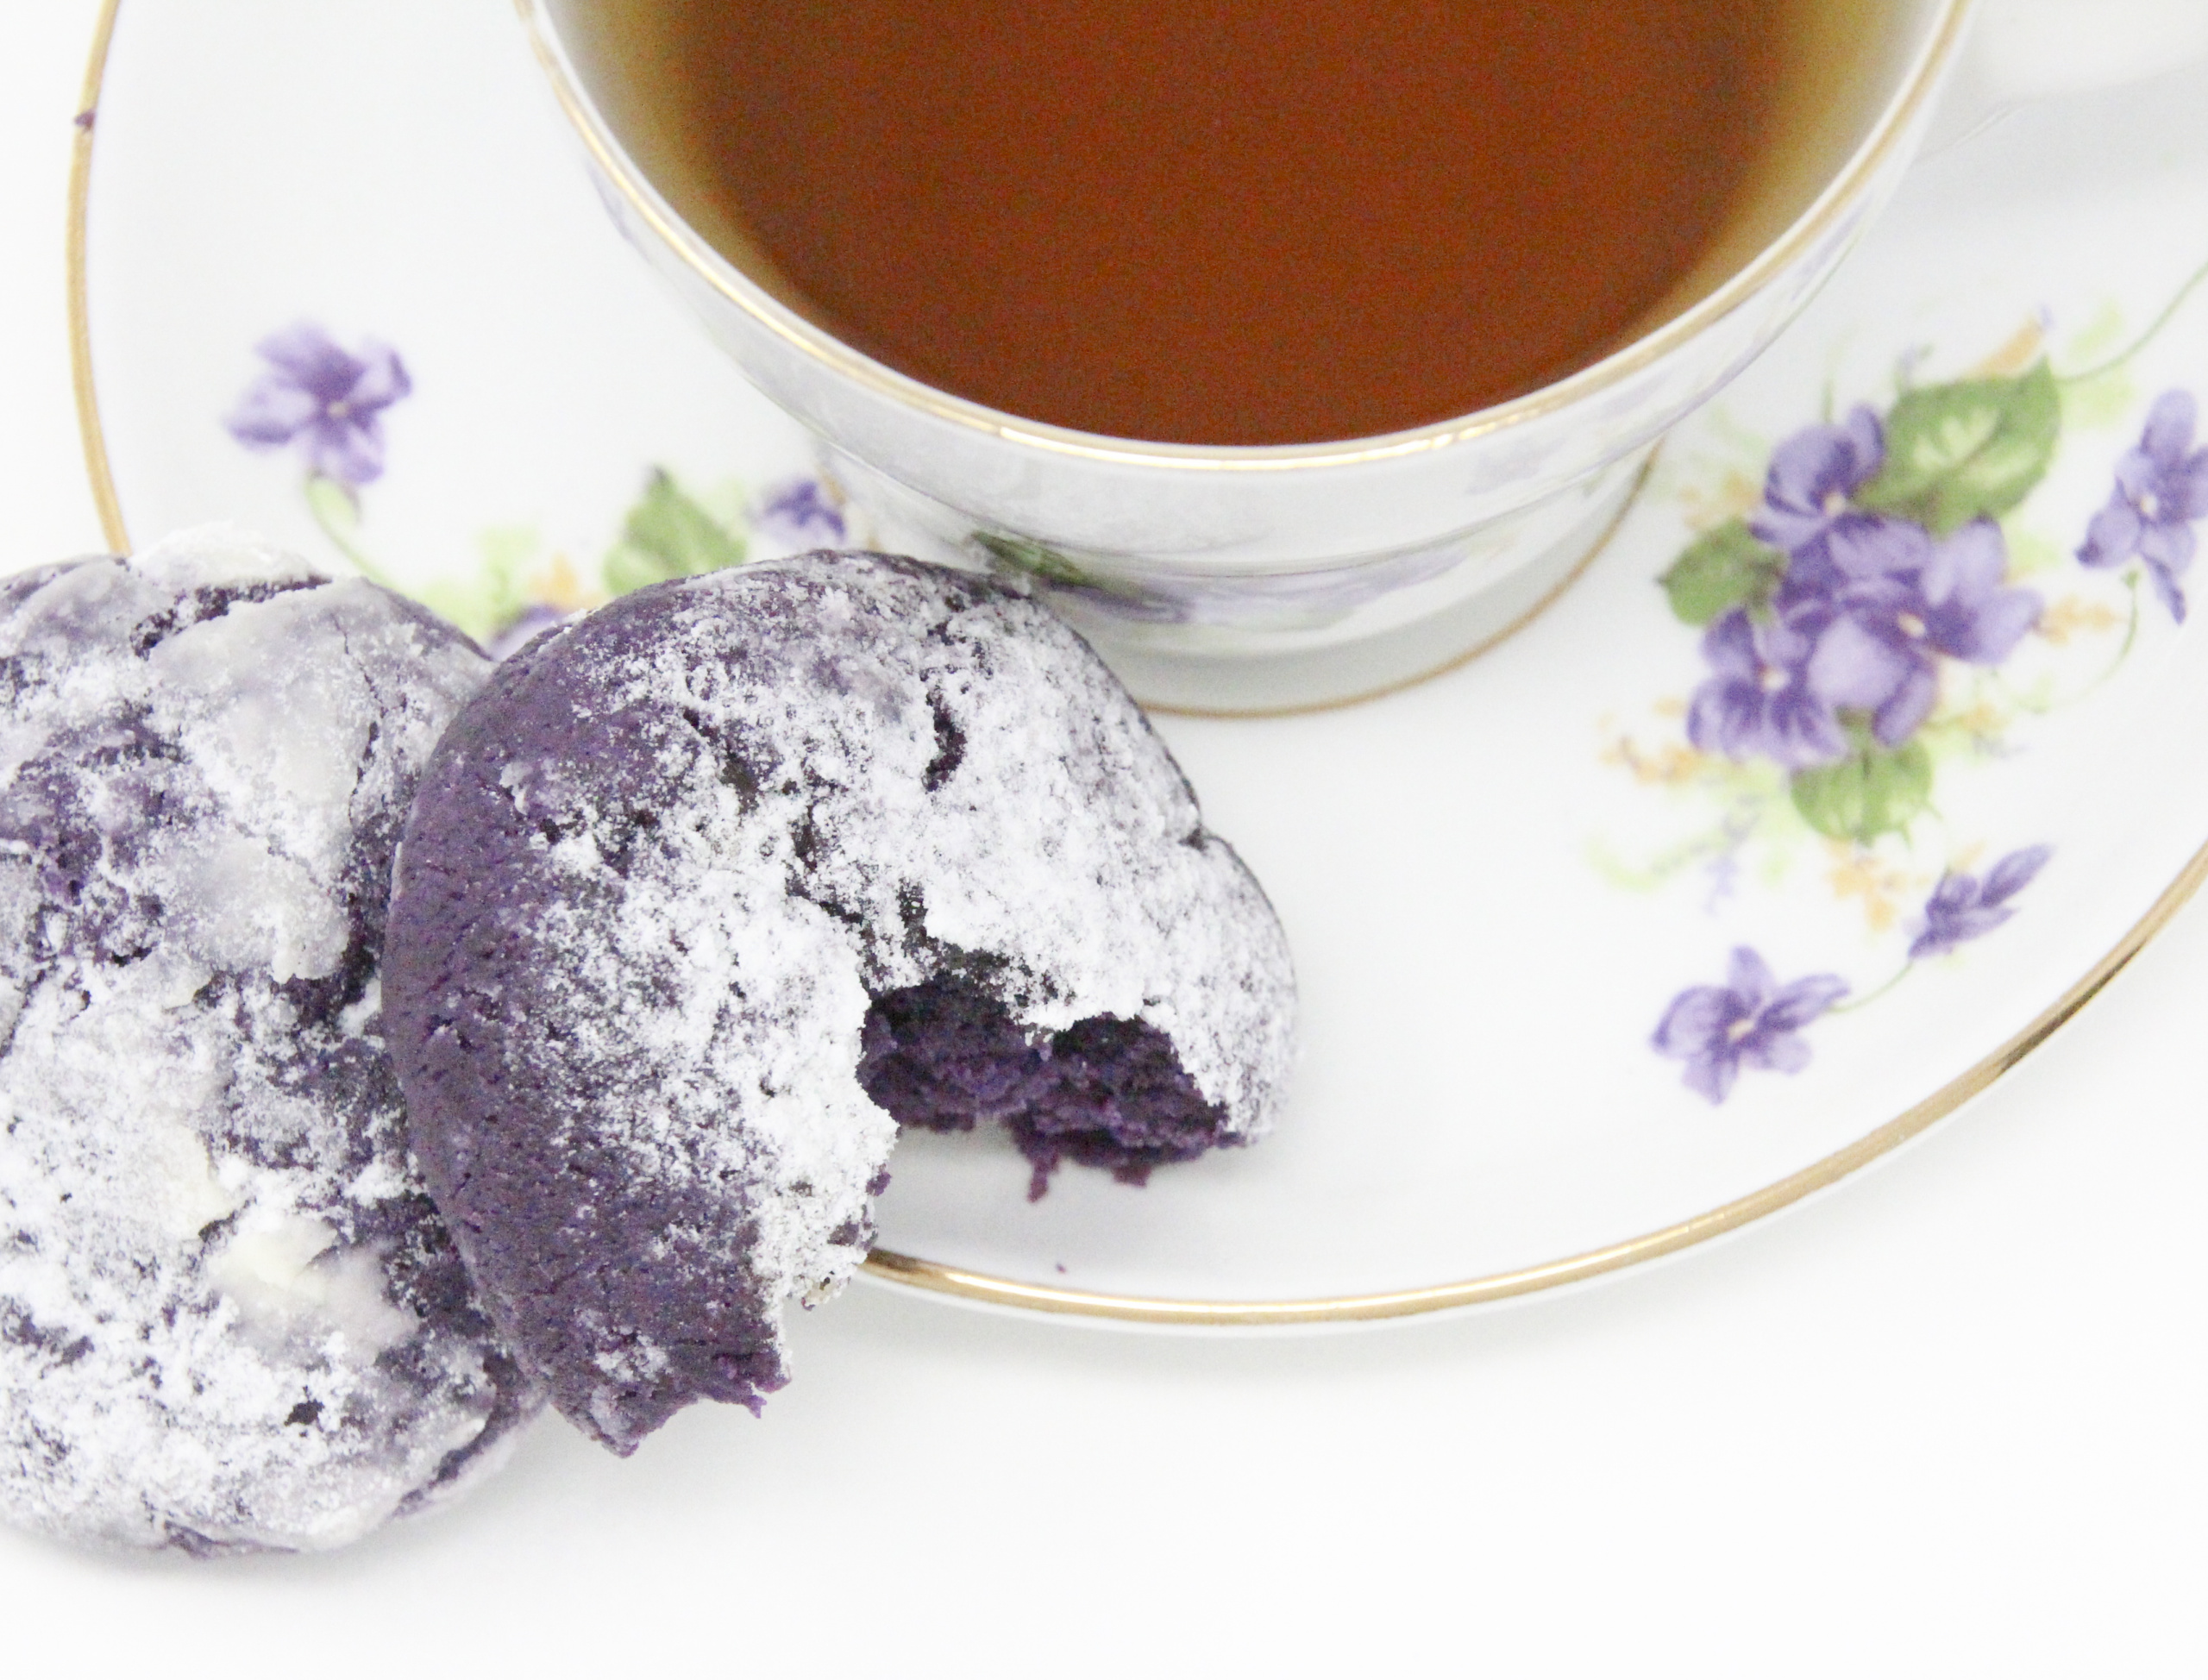 Traditional Filipino Ube Crinkles are delicious as they are unique and provide a welcome splash of color on any springtime cookie platter! Recipe shared with permission granted by Berkley Publishing, from cozy mystery ARSENIC AND ADOBO by Mia P. Manansala.